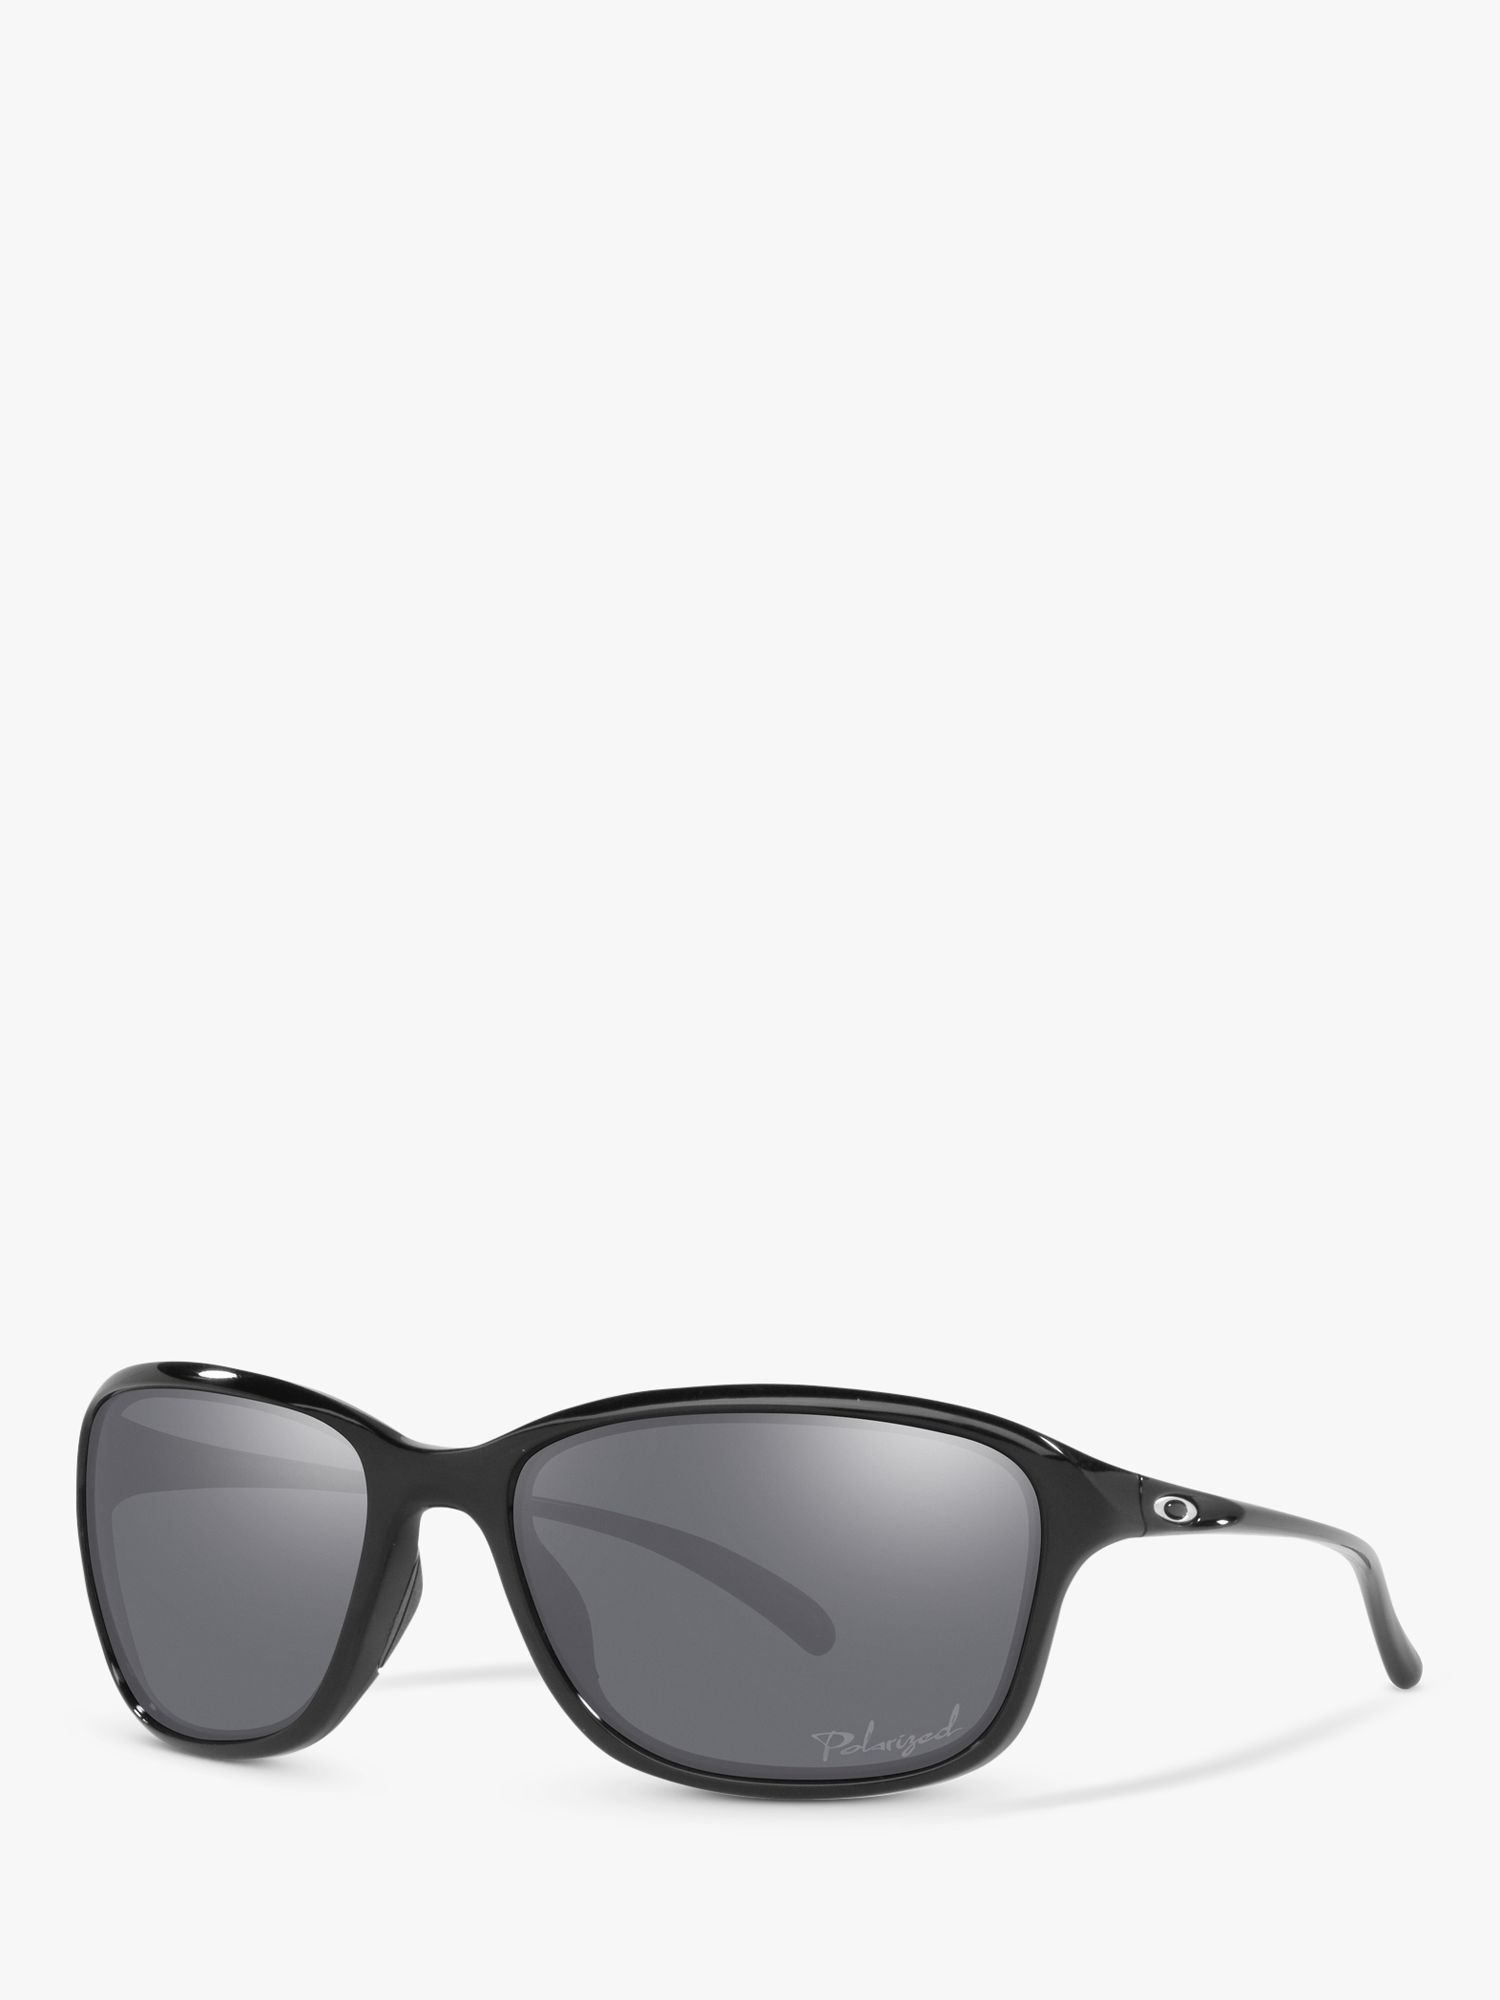 Oakley OO9297 Women's She's Unstoppable Polarised Oval Sunglasses, Polished  Black/Mirror Grey at John Lewis & Partners